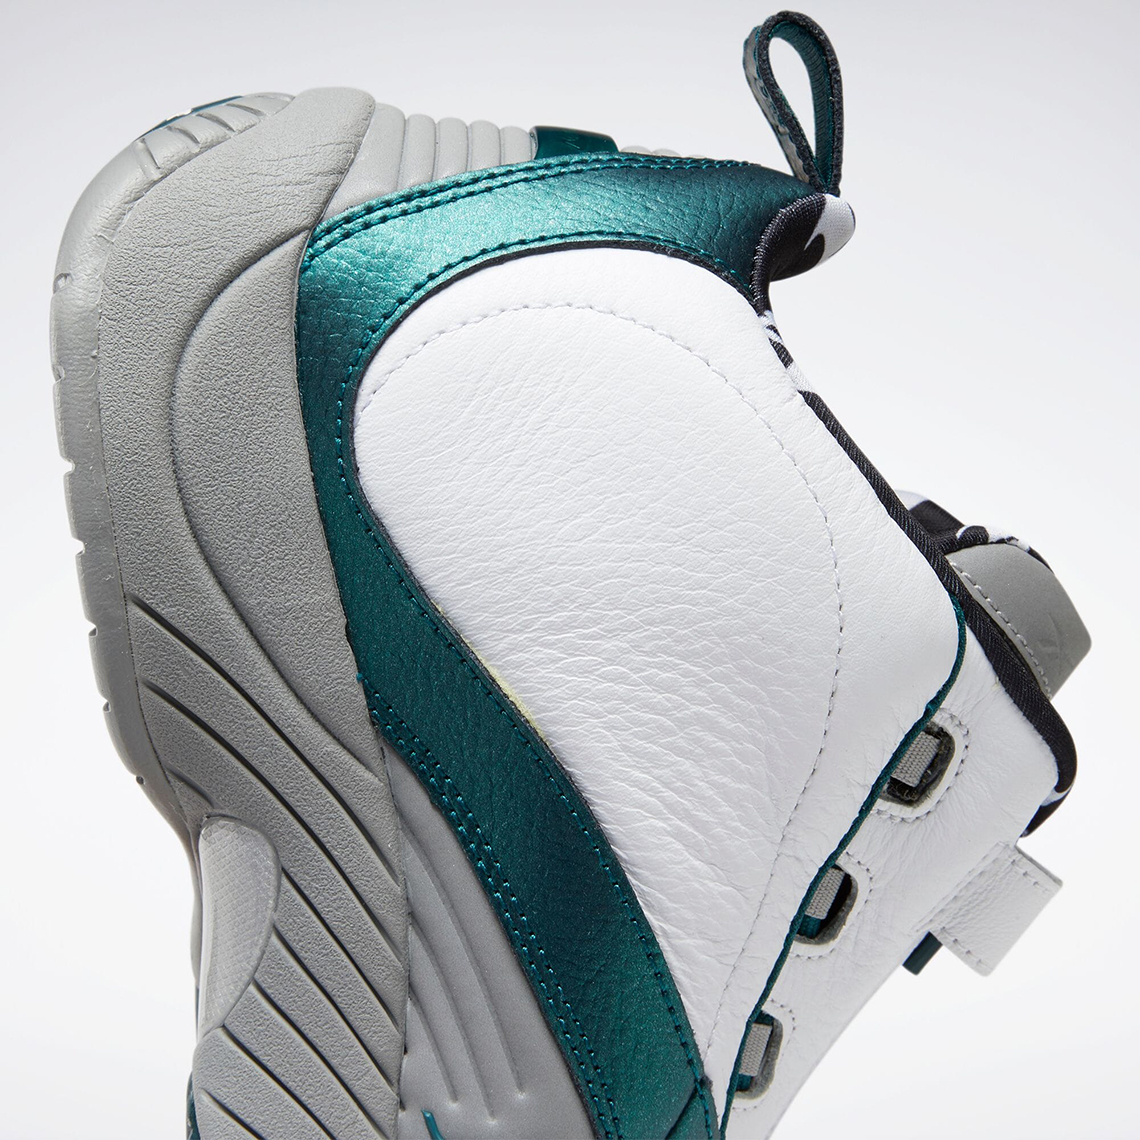 Reebok Answer 4 Eagles The Tunnel Gx6235 Release Date 8